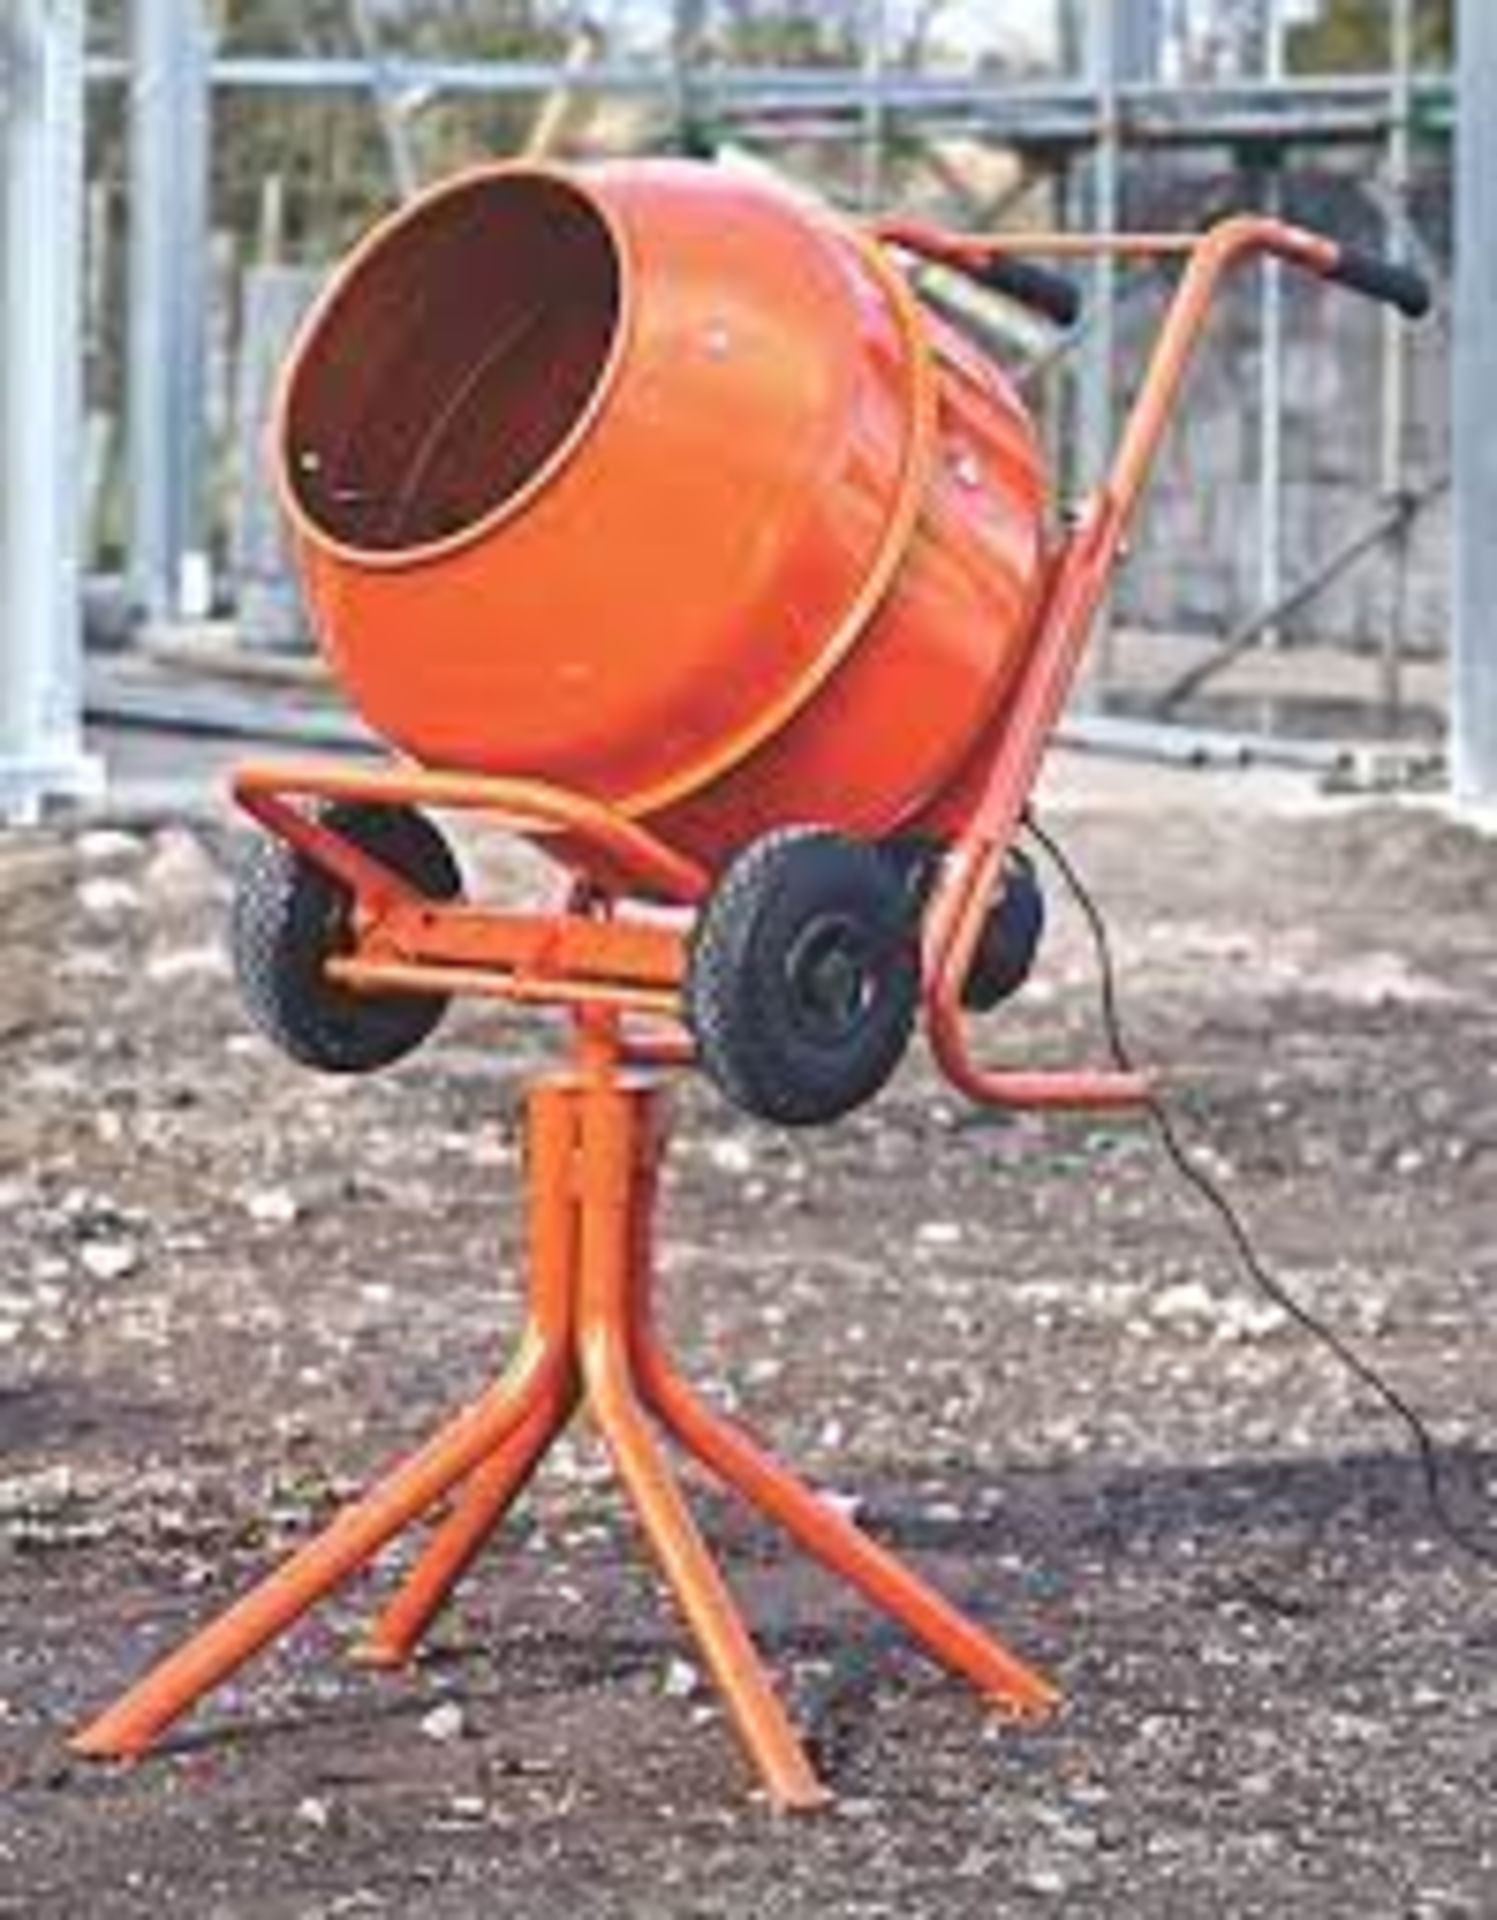 134LTR CONCRETE MIXER 230V. Upright mixer for small to medium building projects. Light and - Image 2 of 3